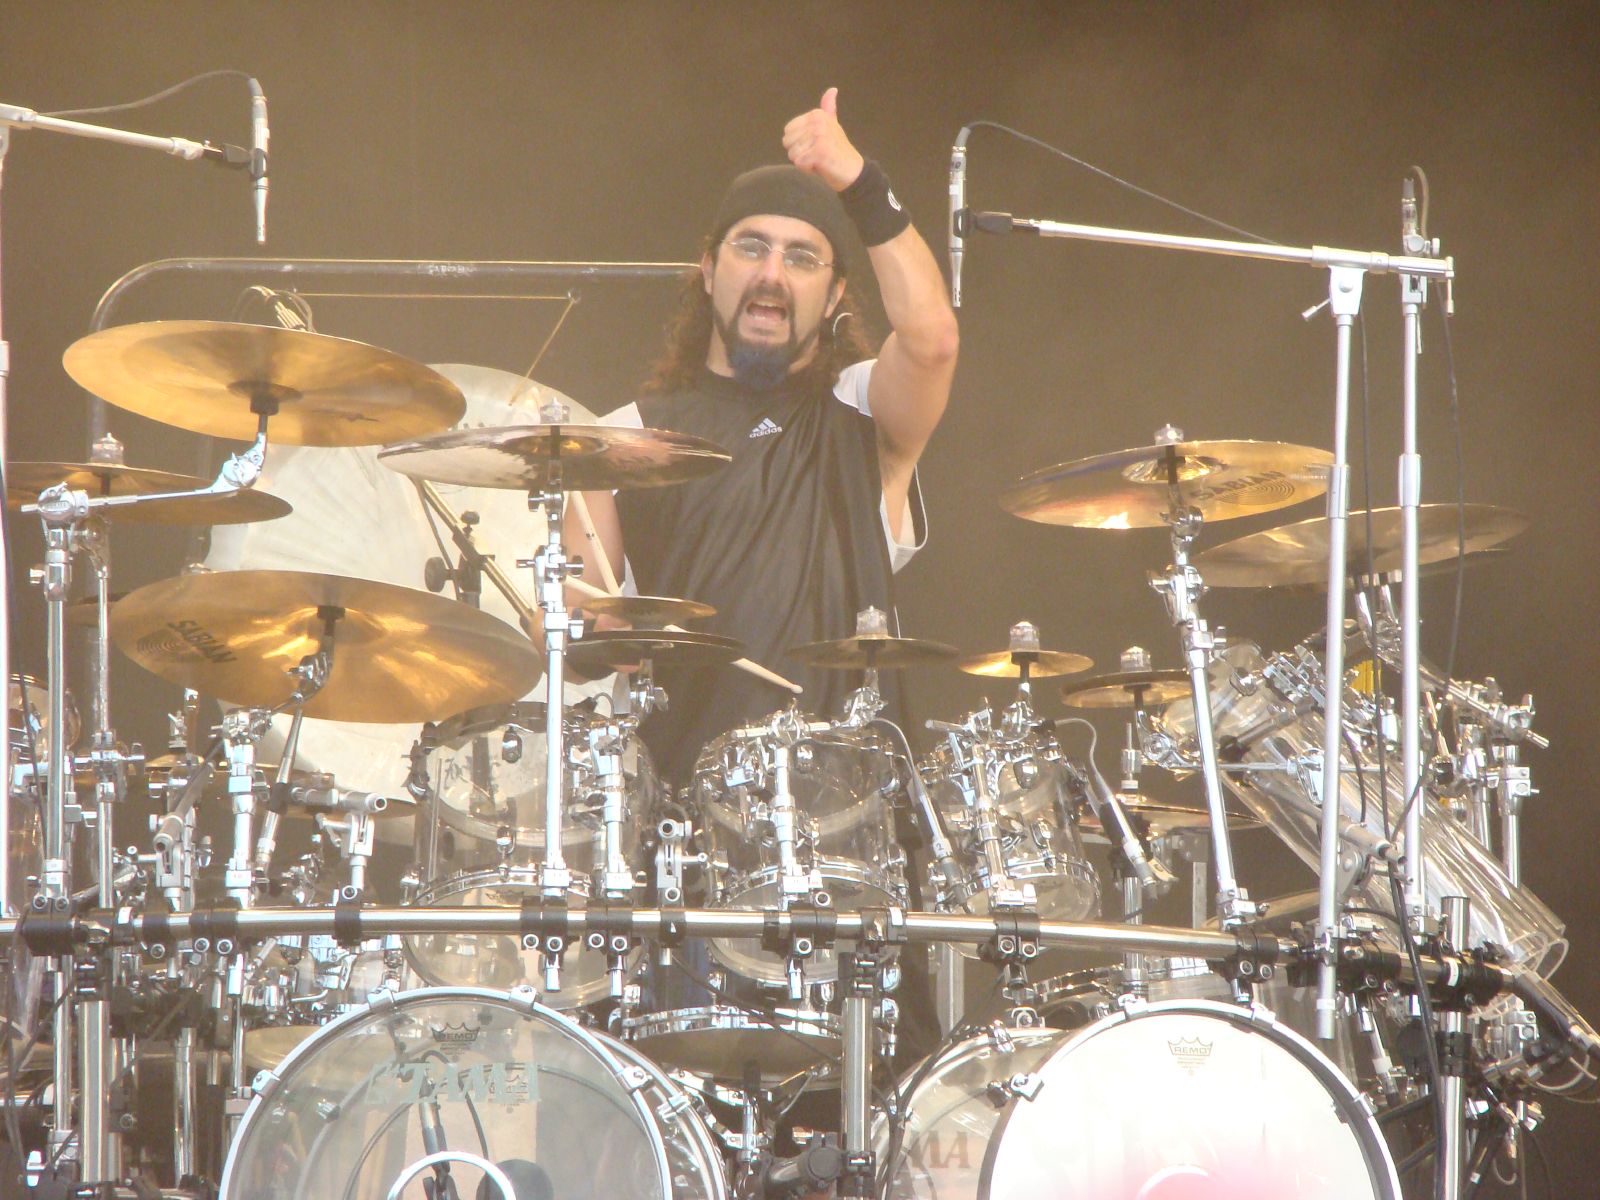 a man playing drums while giving the thumbs up